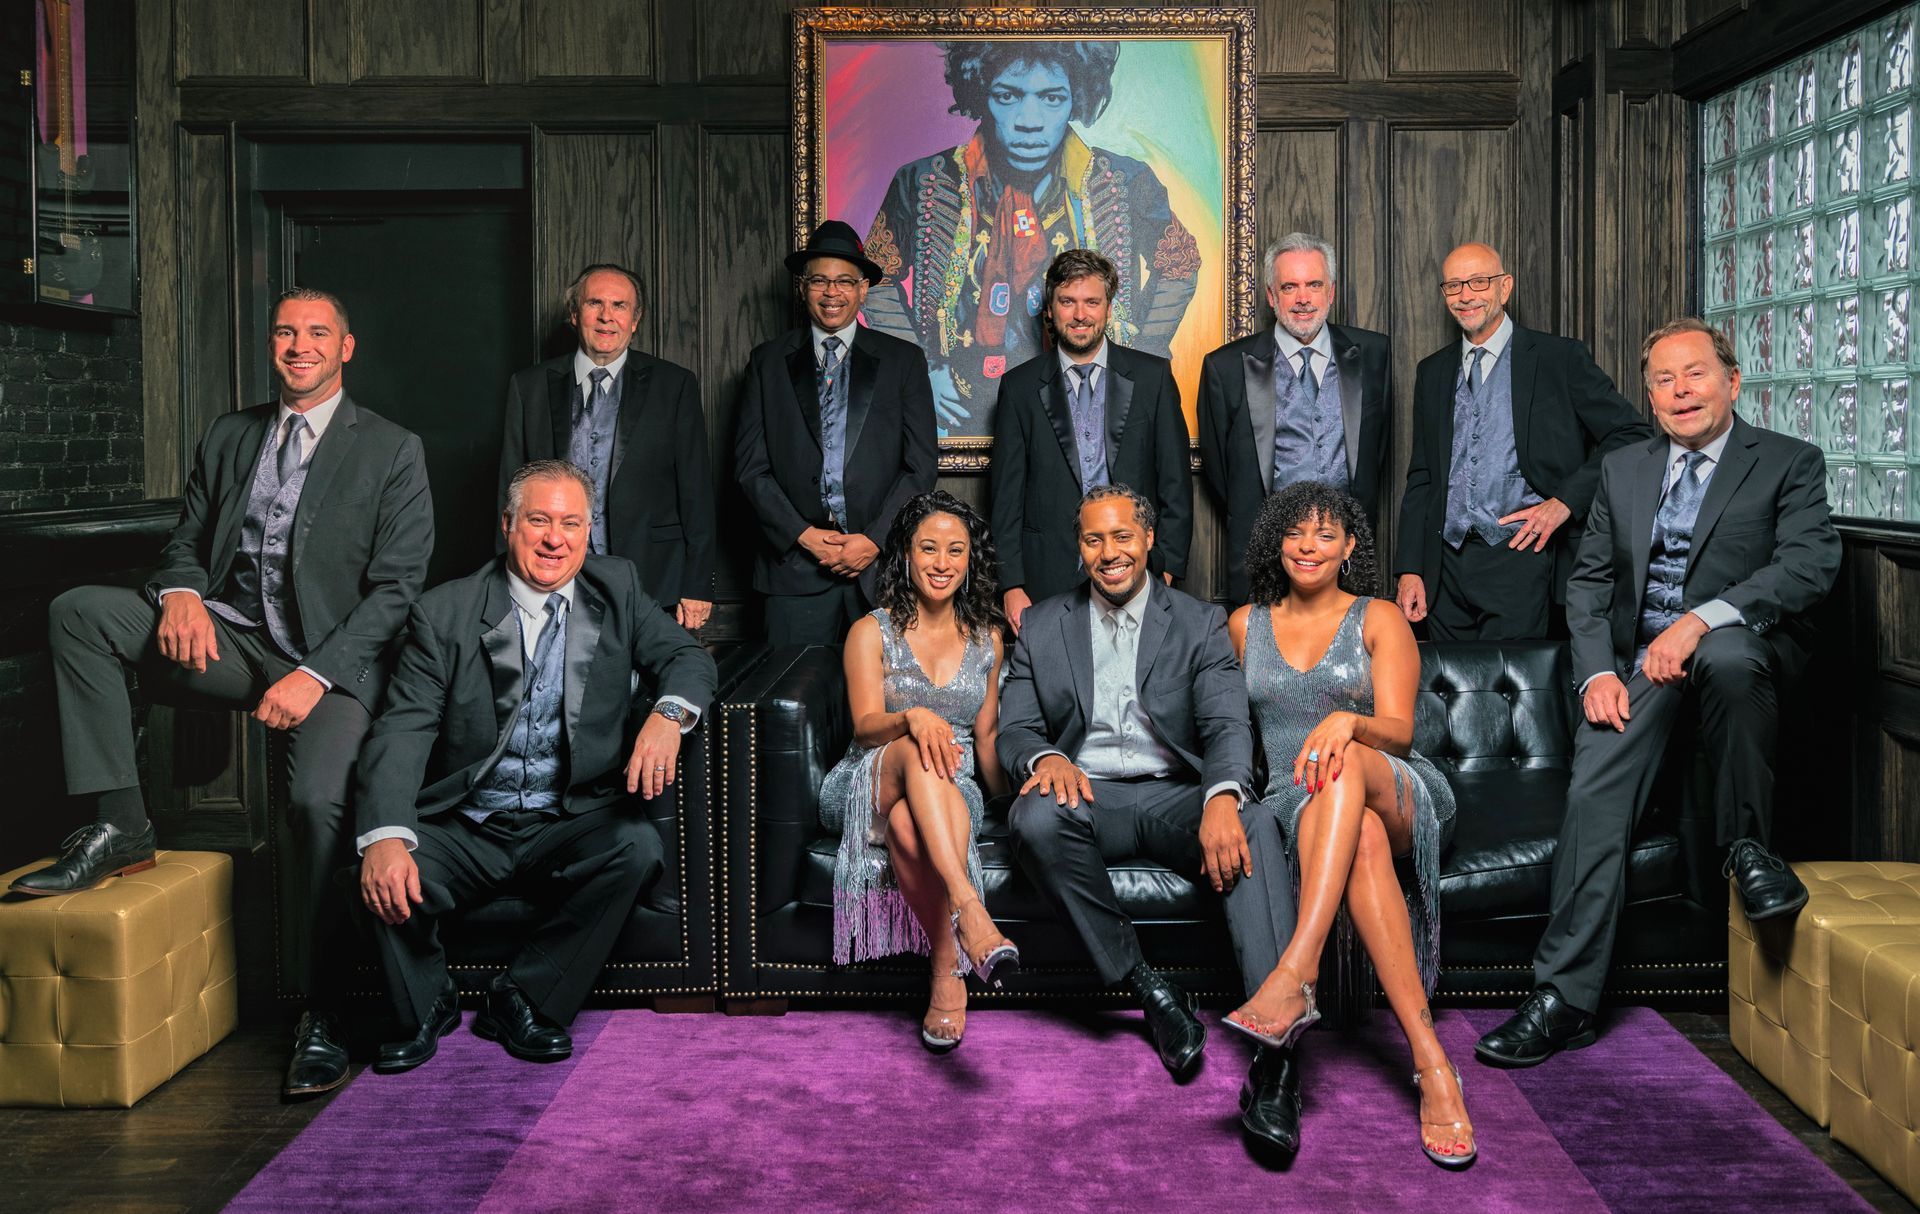 The ultimate experience: Mainstreet Soul full band posing in front of Jimi Hendrix's colorful painting wearing black and silver.